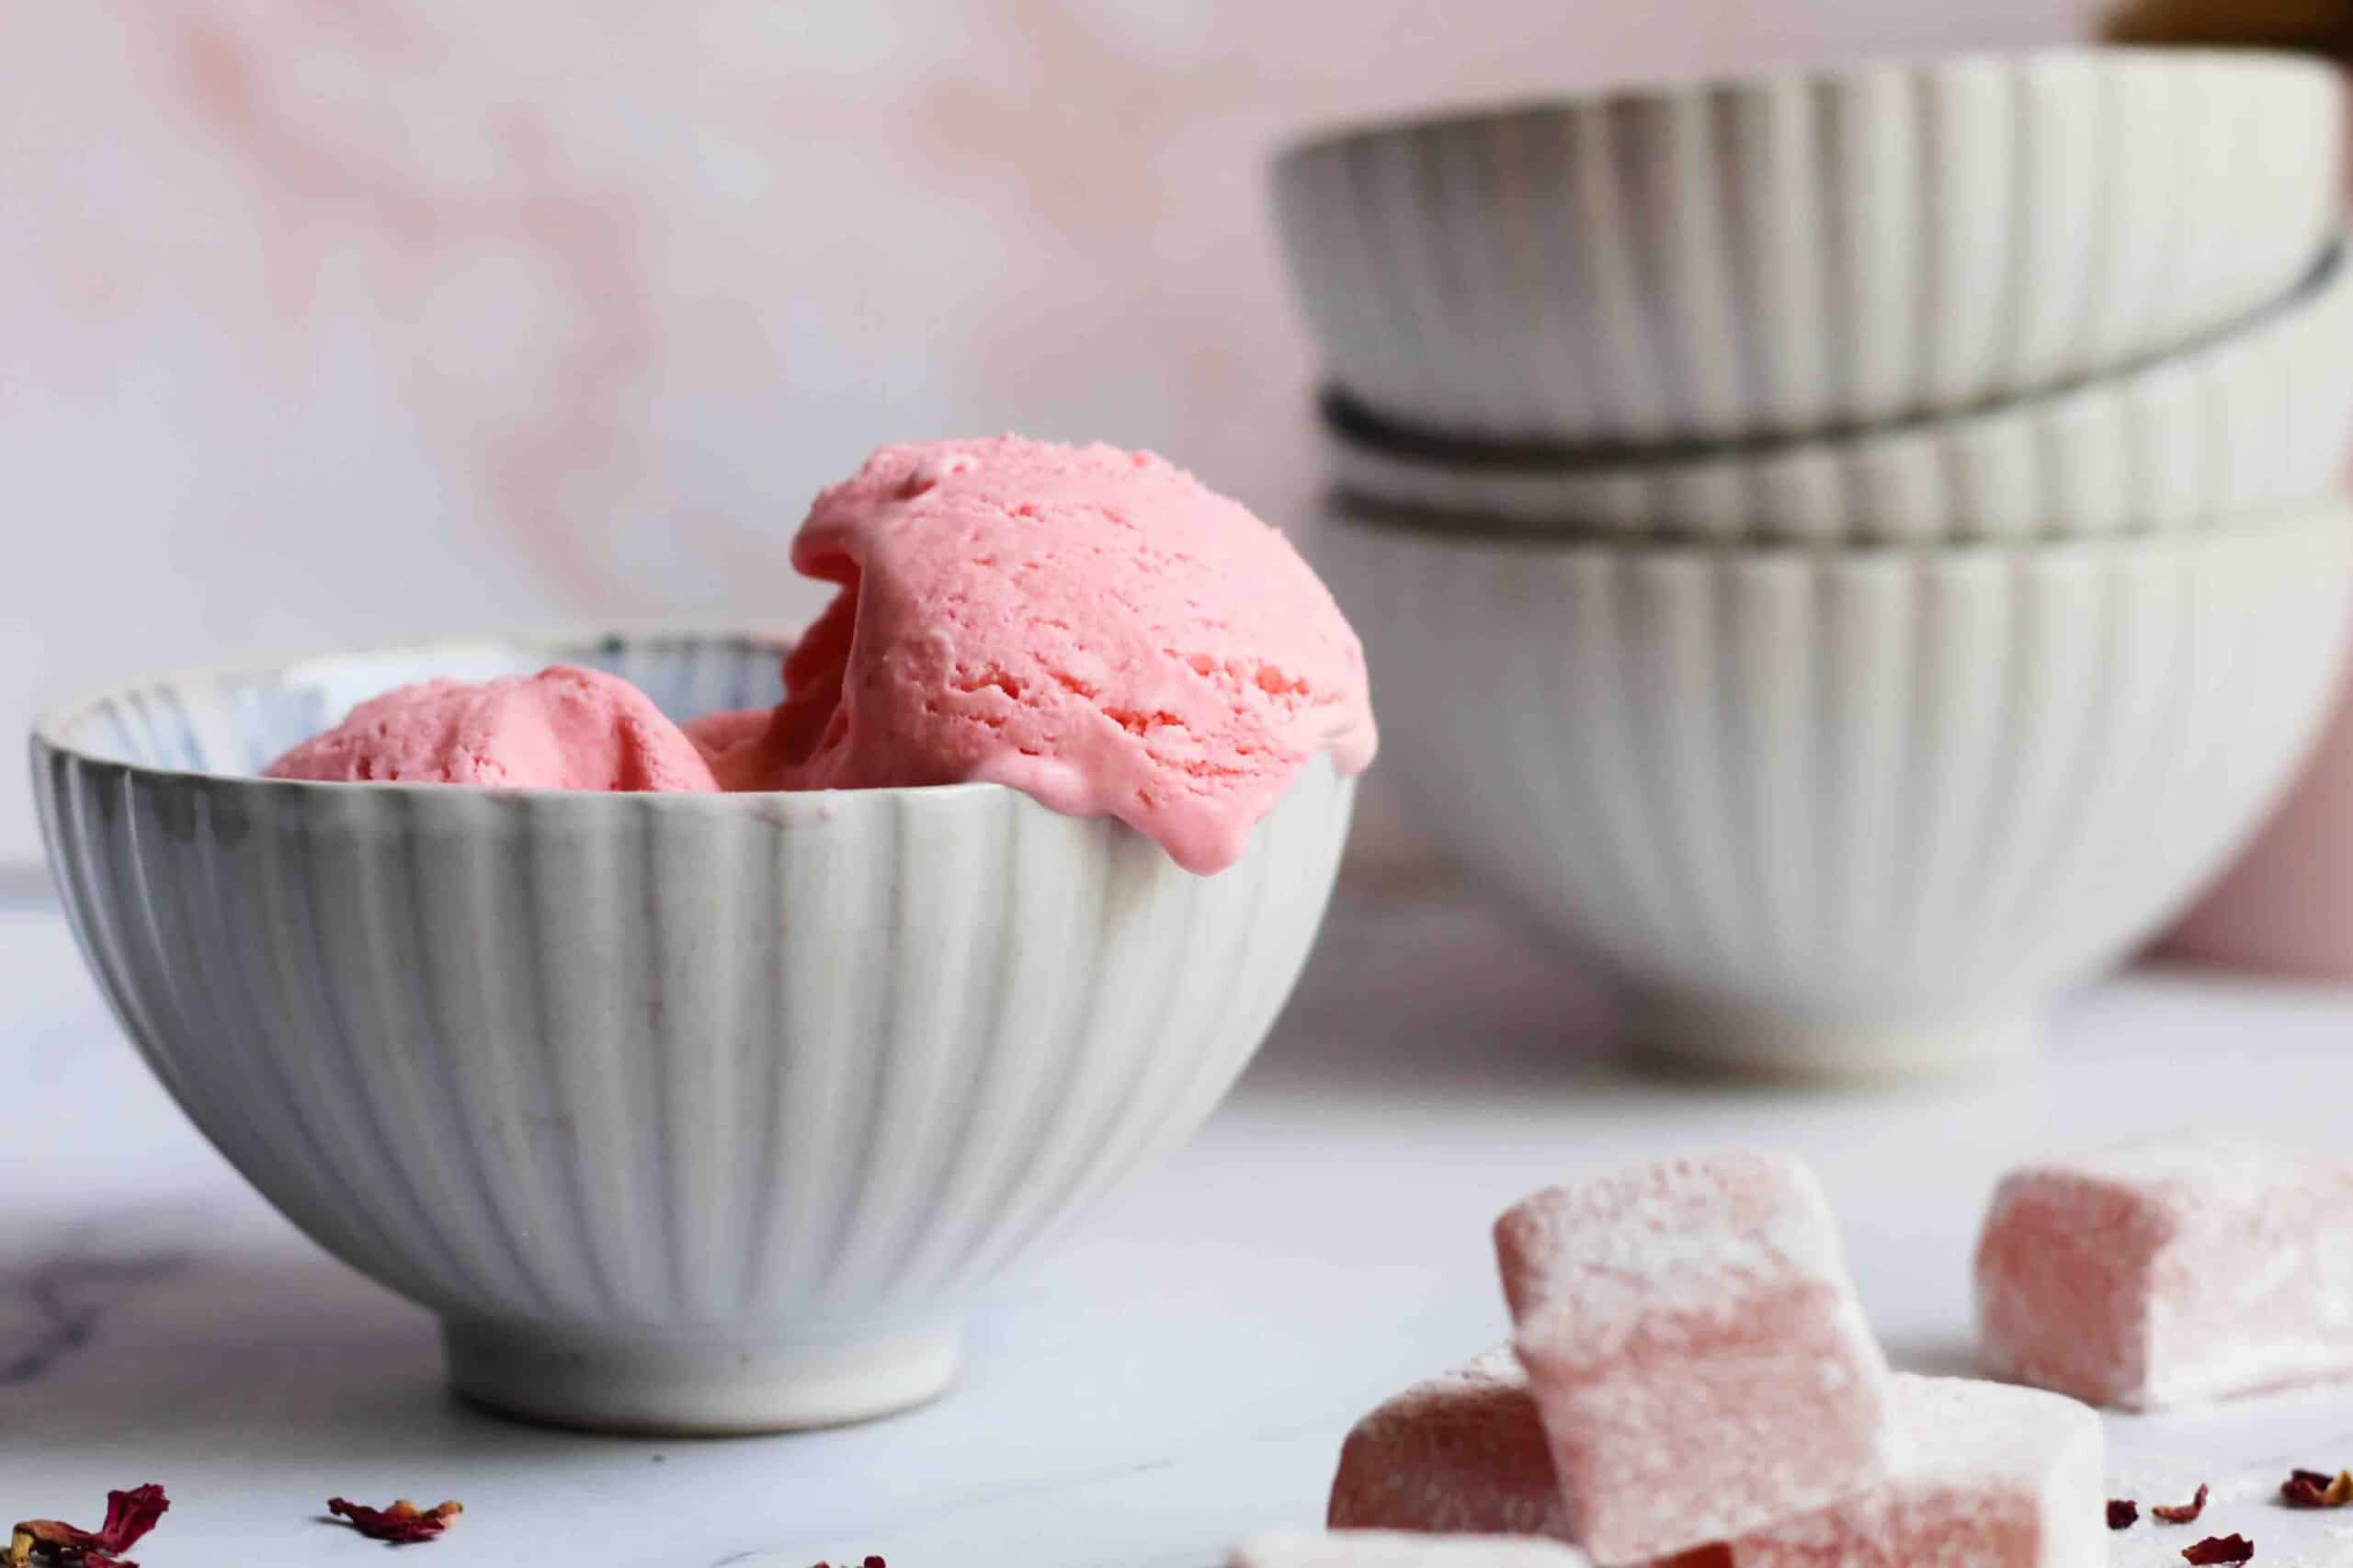 Turkish delight ice cream in a small bowl with more bowls in the background and Turkish delight in the foreground.